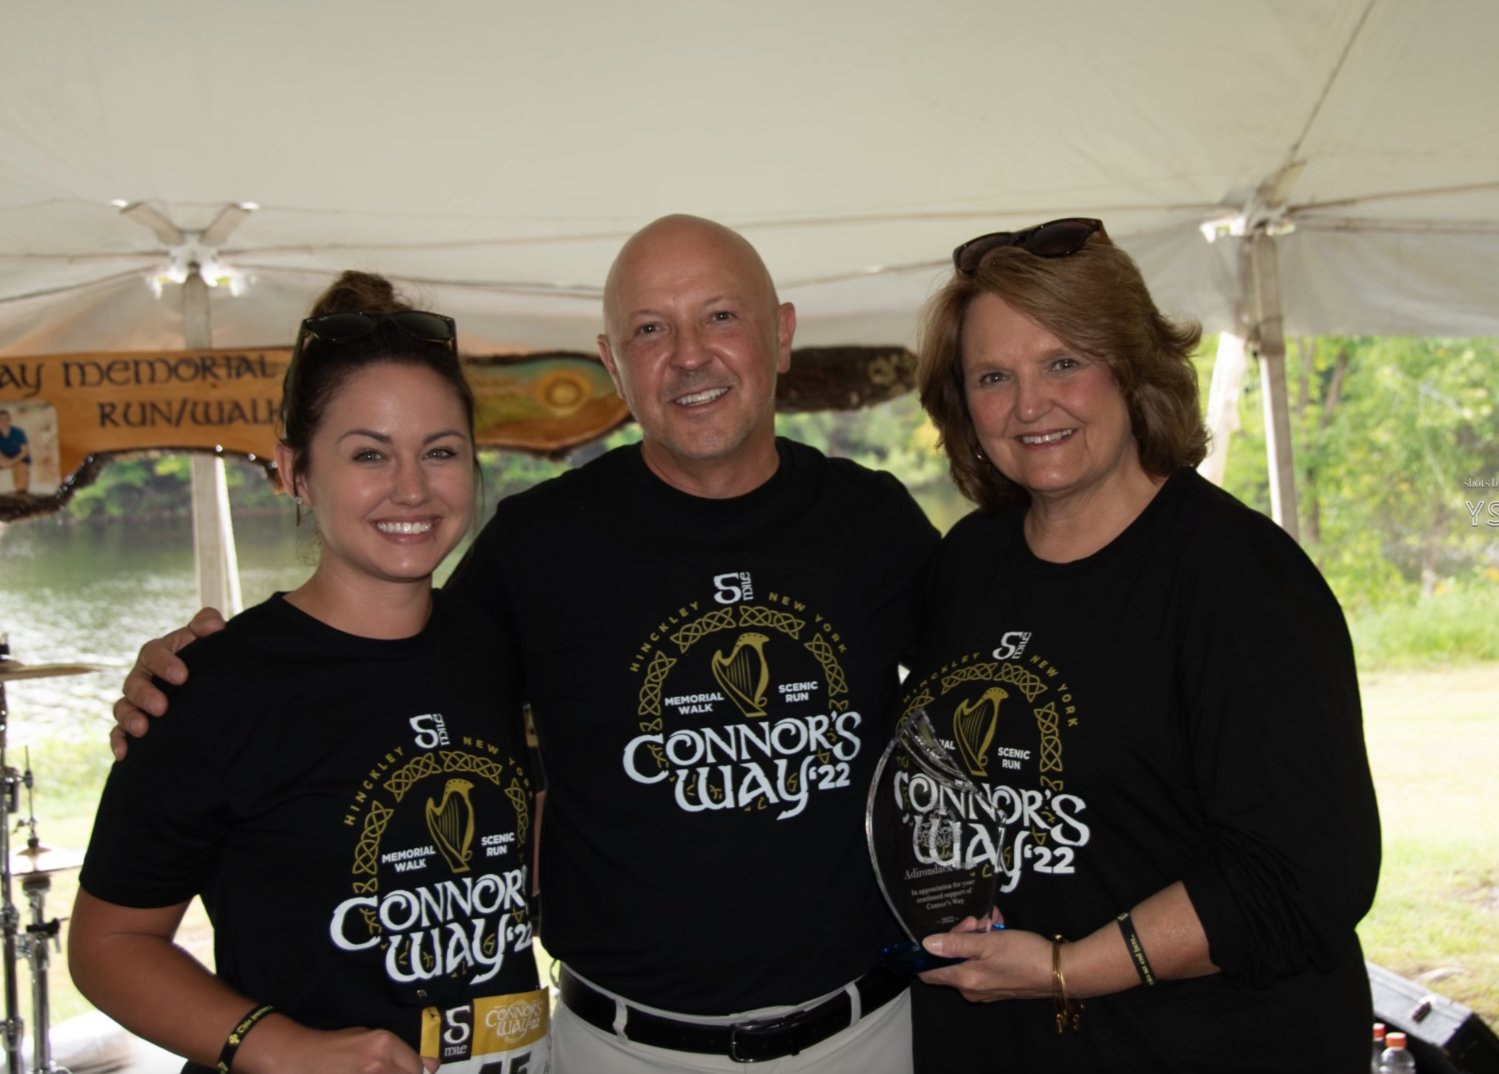 Special recognition at the The Connor’s Way Run/Walk, was given to Adirondack Bank, a top sponsor for all five years of Connor’s Way with a plaque presentation by Race Director Don Lynskey, center, to bank representatives Debbie Cotton and Kristen Bourgeois.